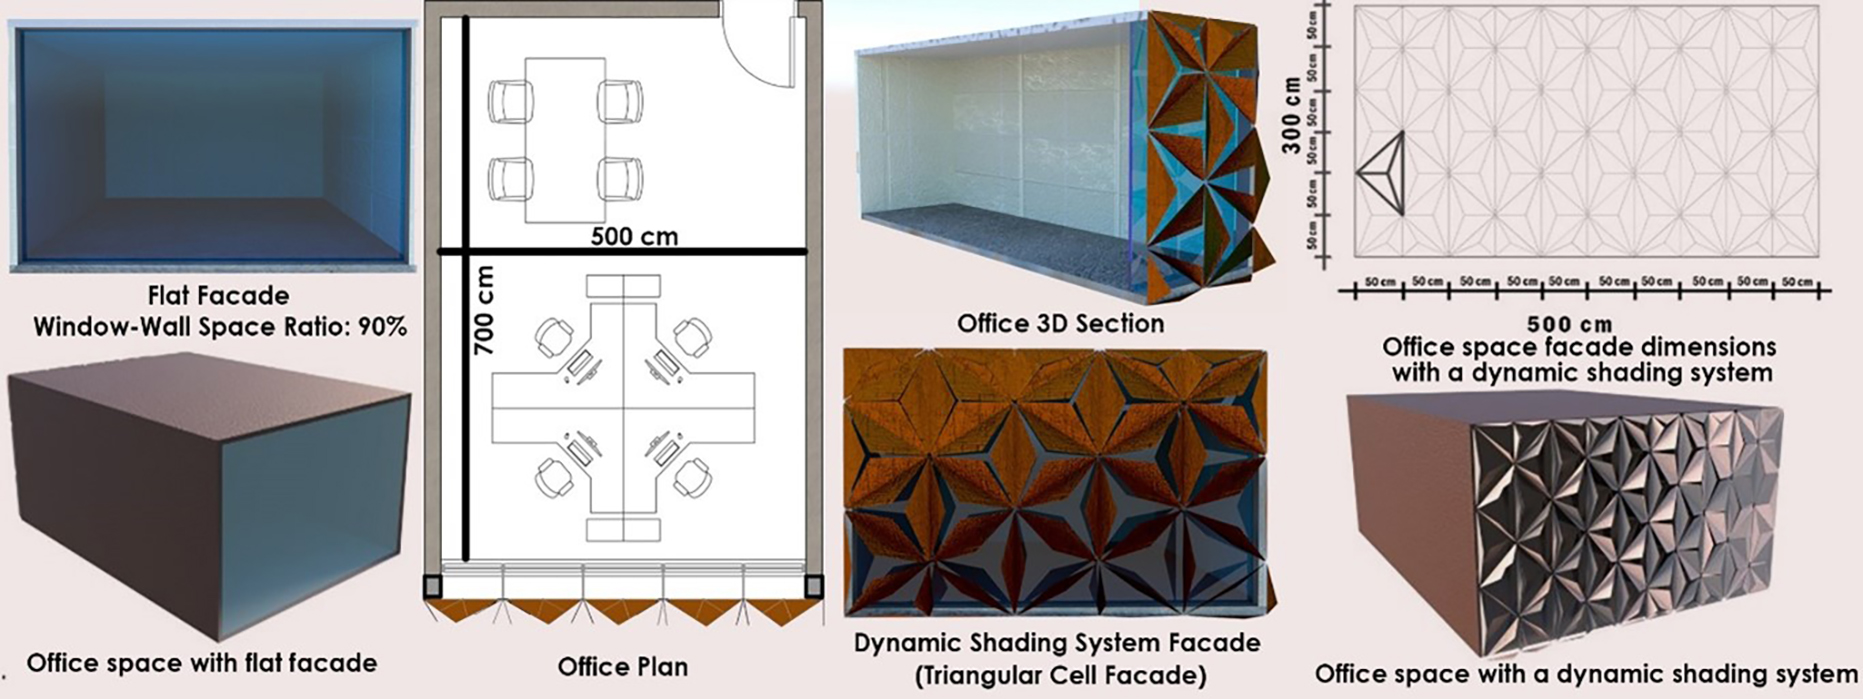 Flat facade, Dynamic shading system facade, Sections and Office plan.